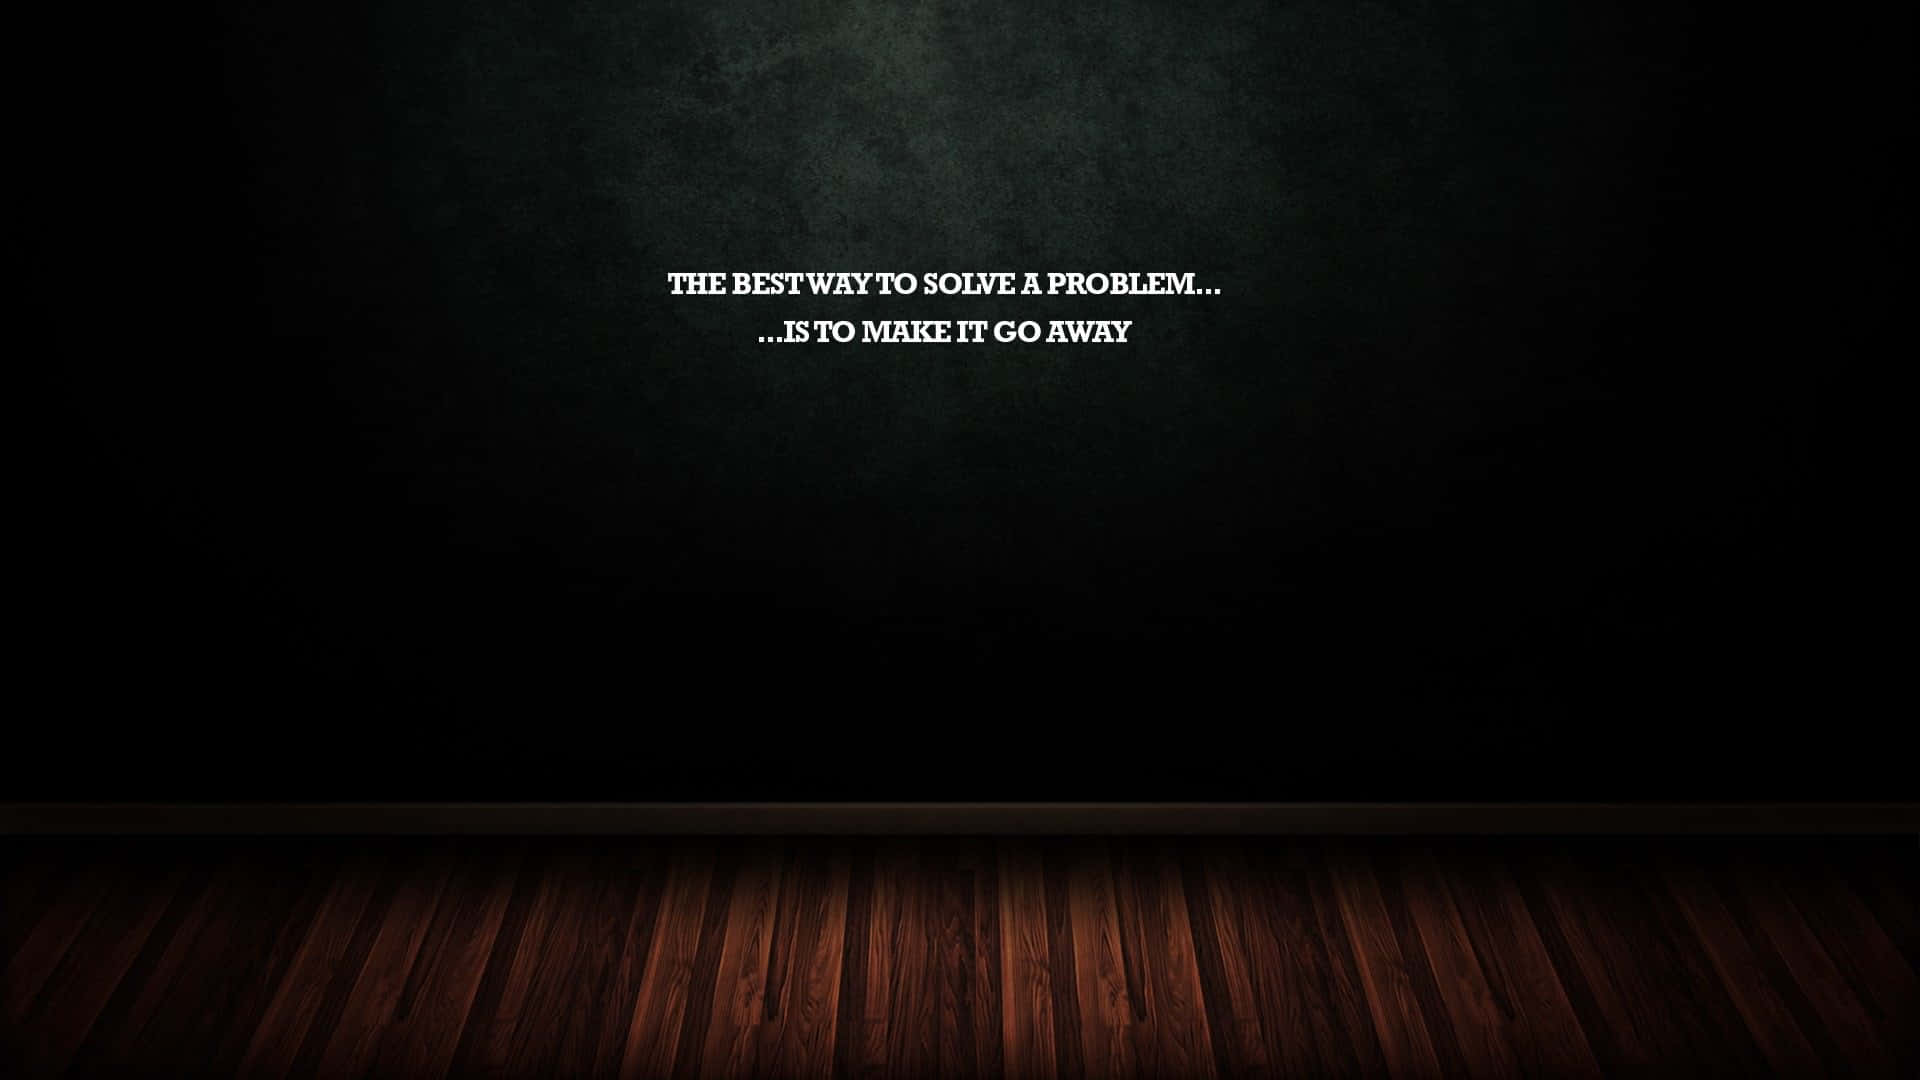 "Expressive 'Go Away' in Bold Typography on Smooth Black Background" Wallpaper